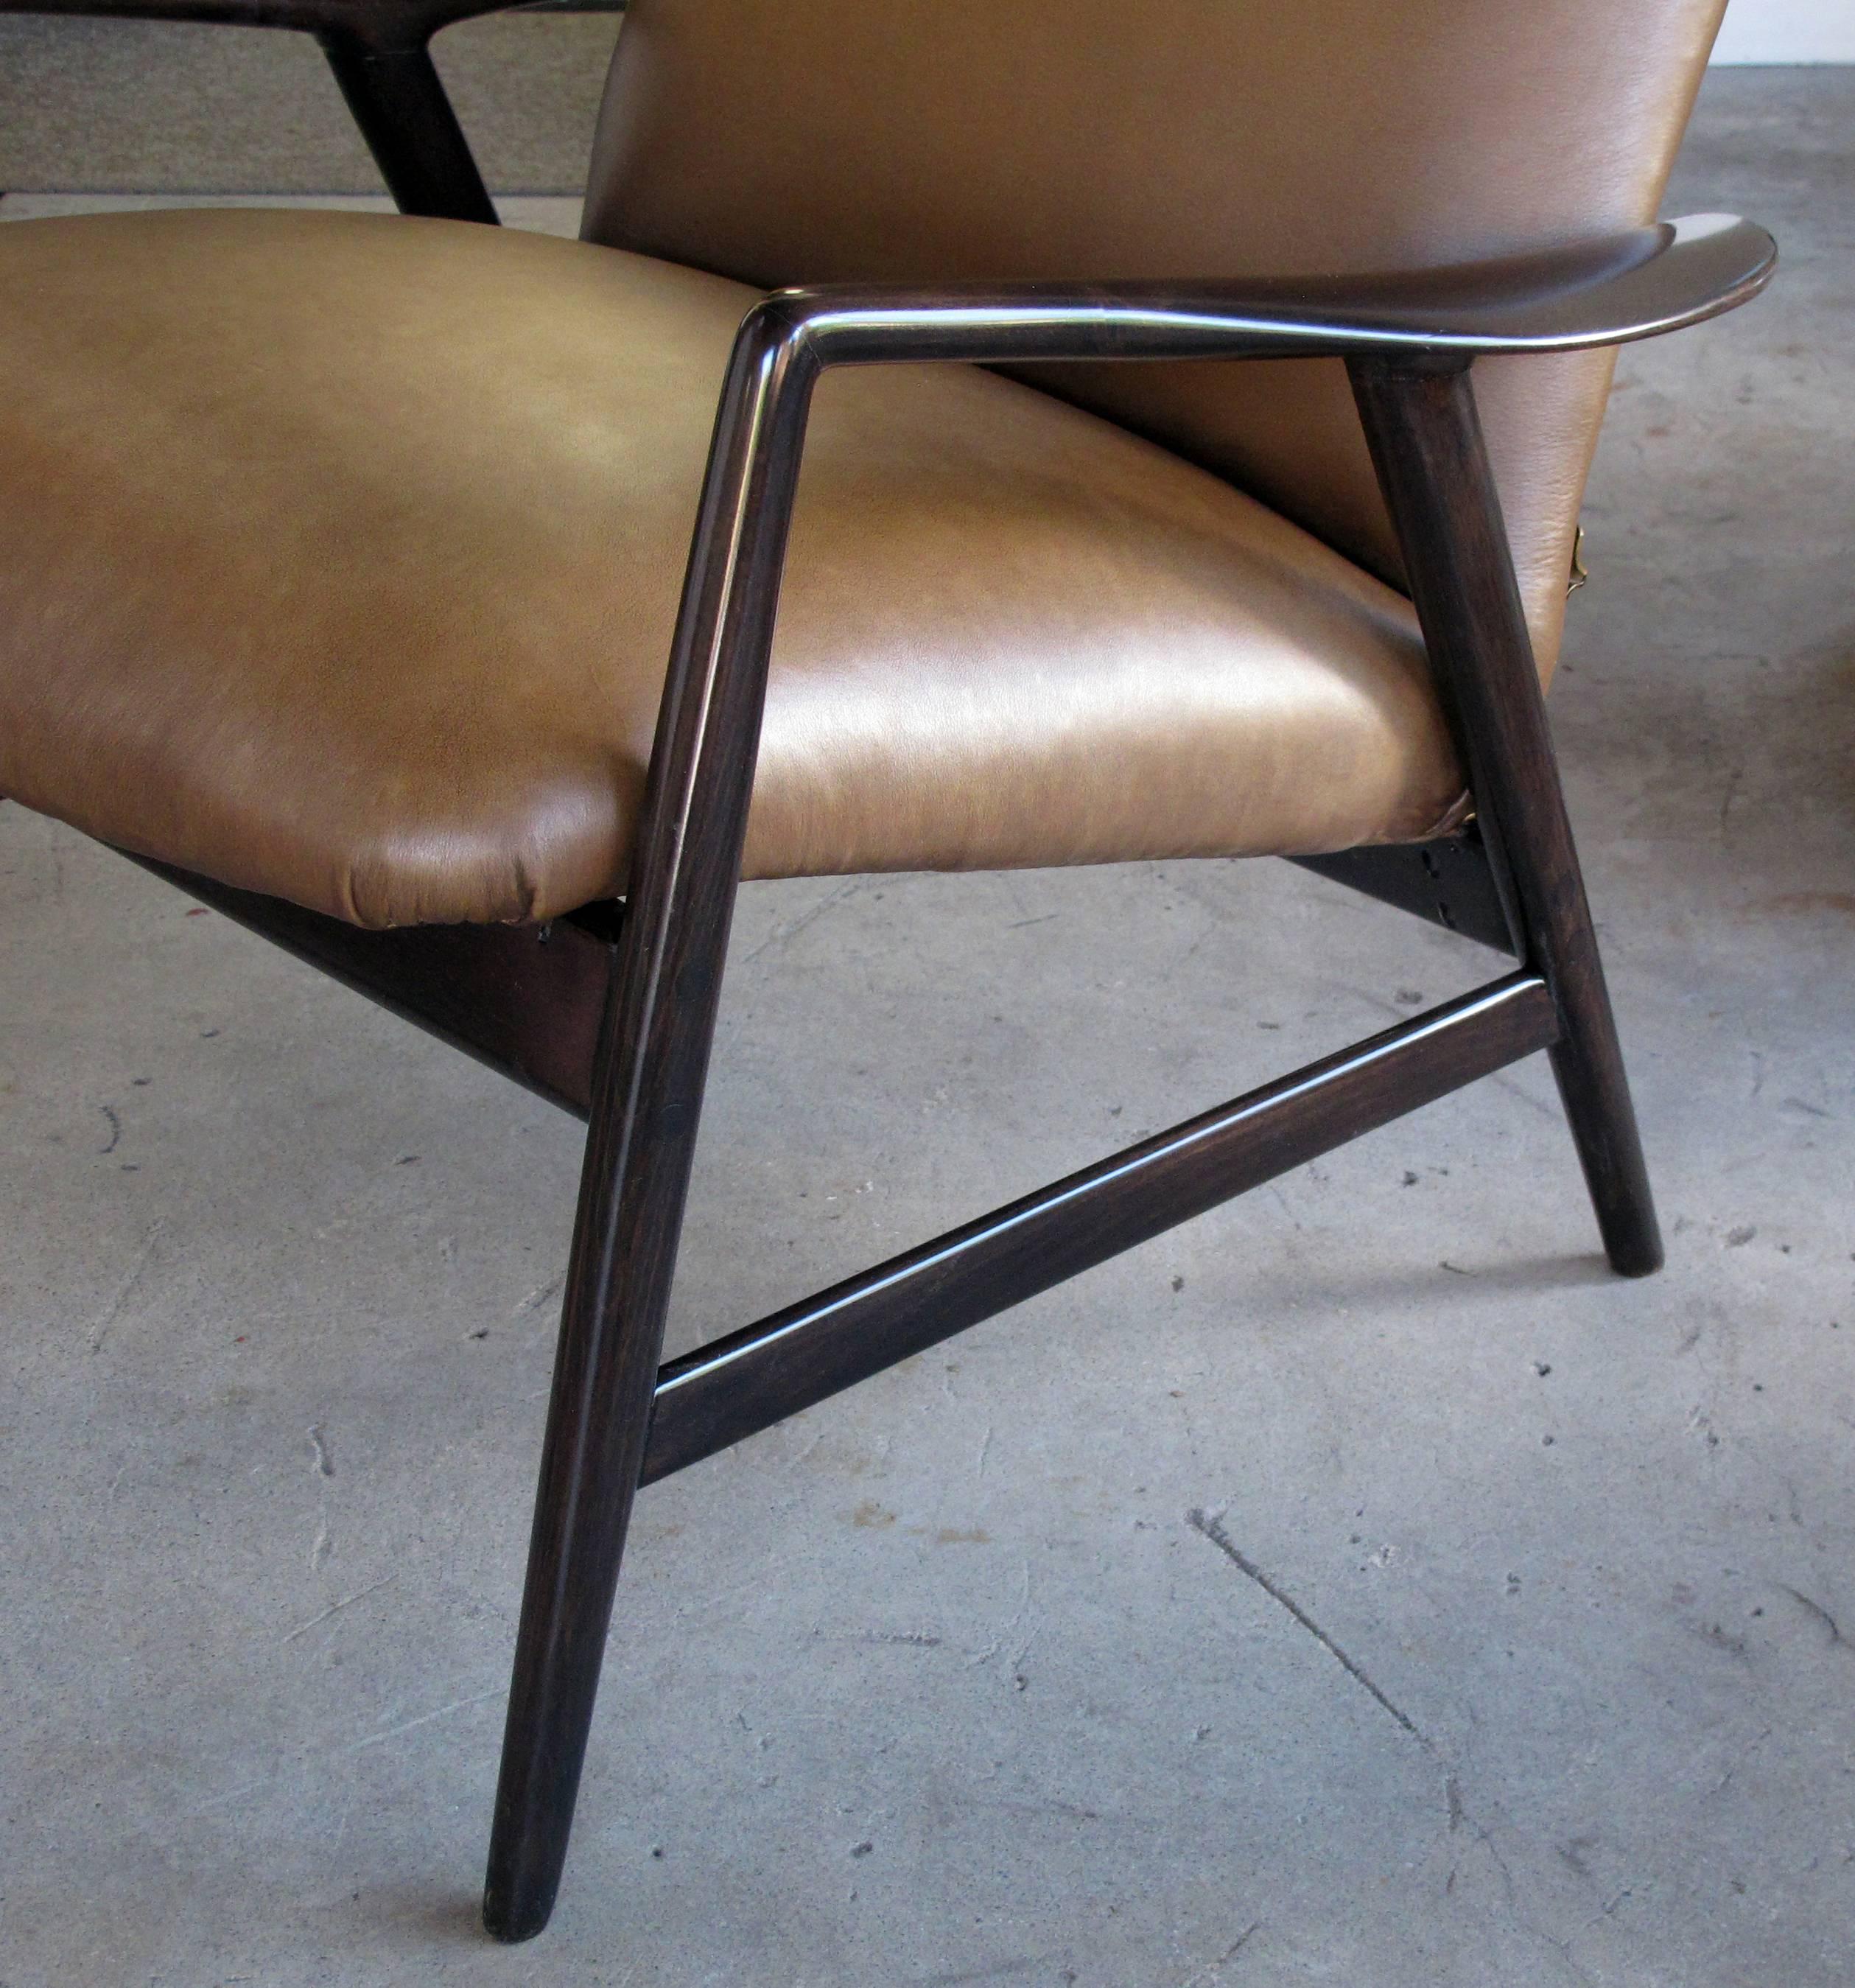 Stylish Danish Modern Alf Svensson for Fritz Hansen Two-Position Reclining Chair In Excellent Condition For Sale In San Francisco, CA